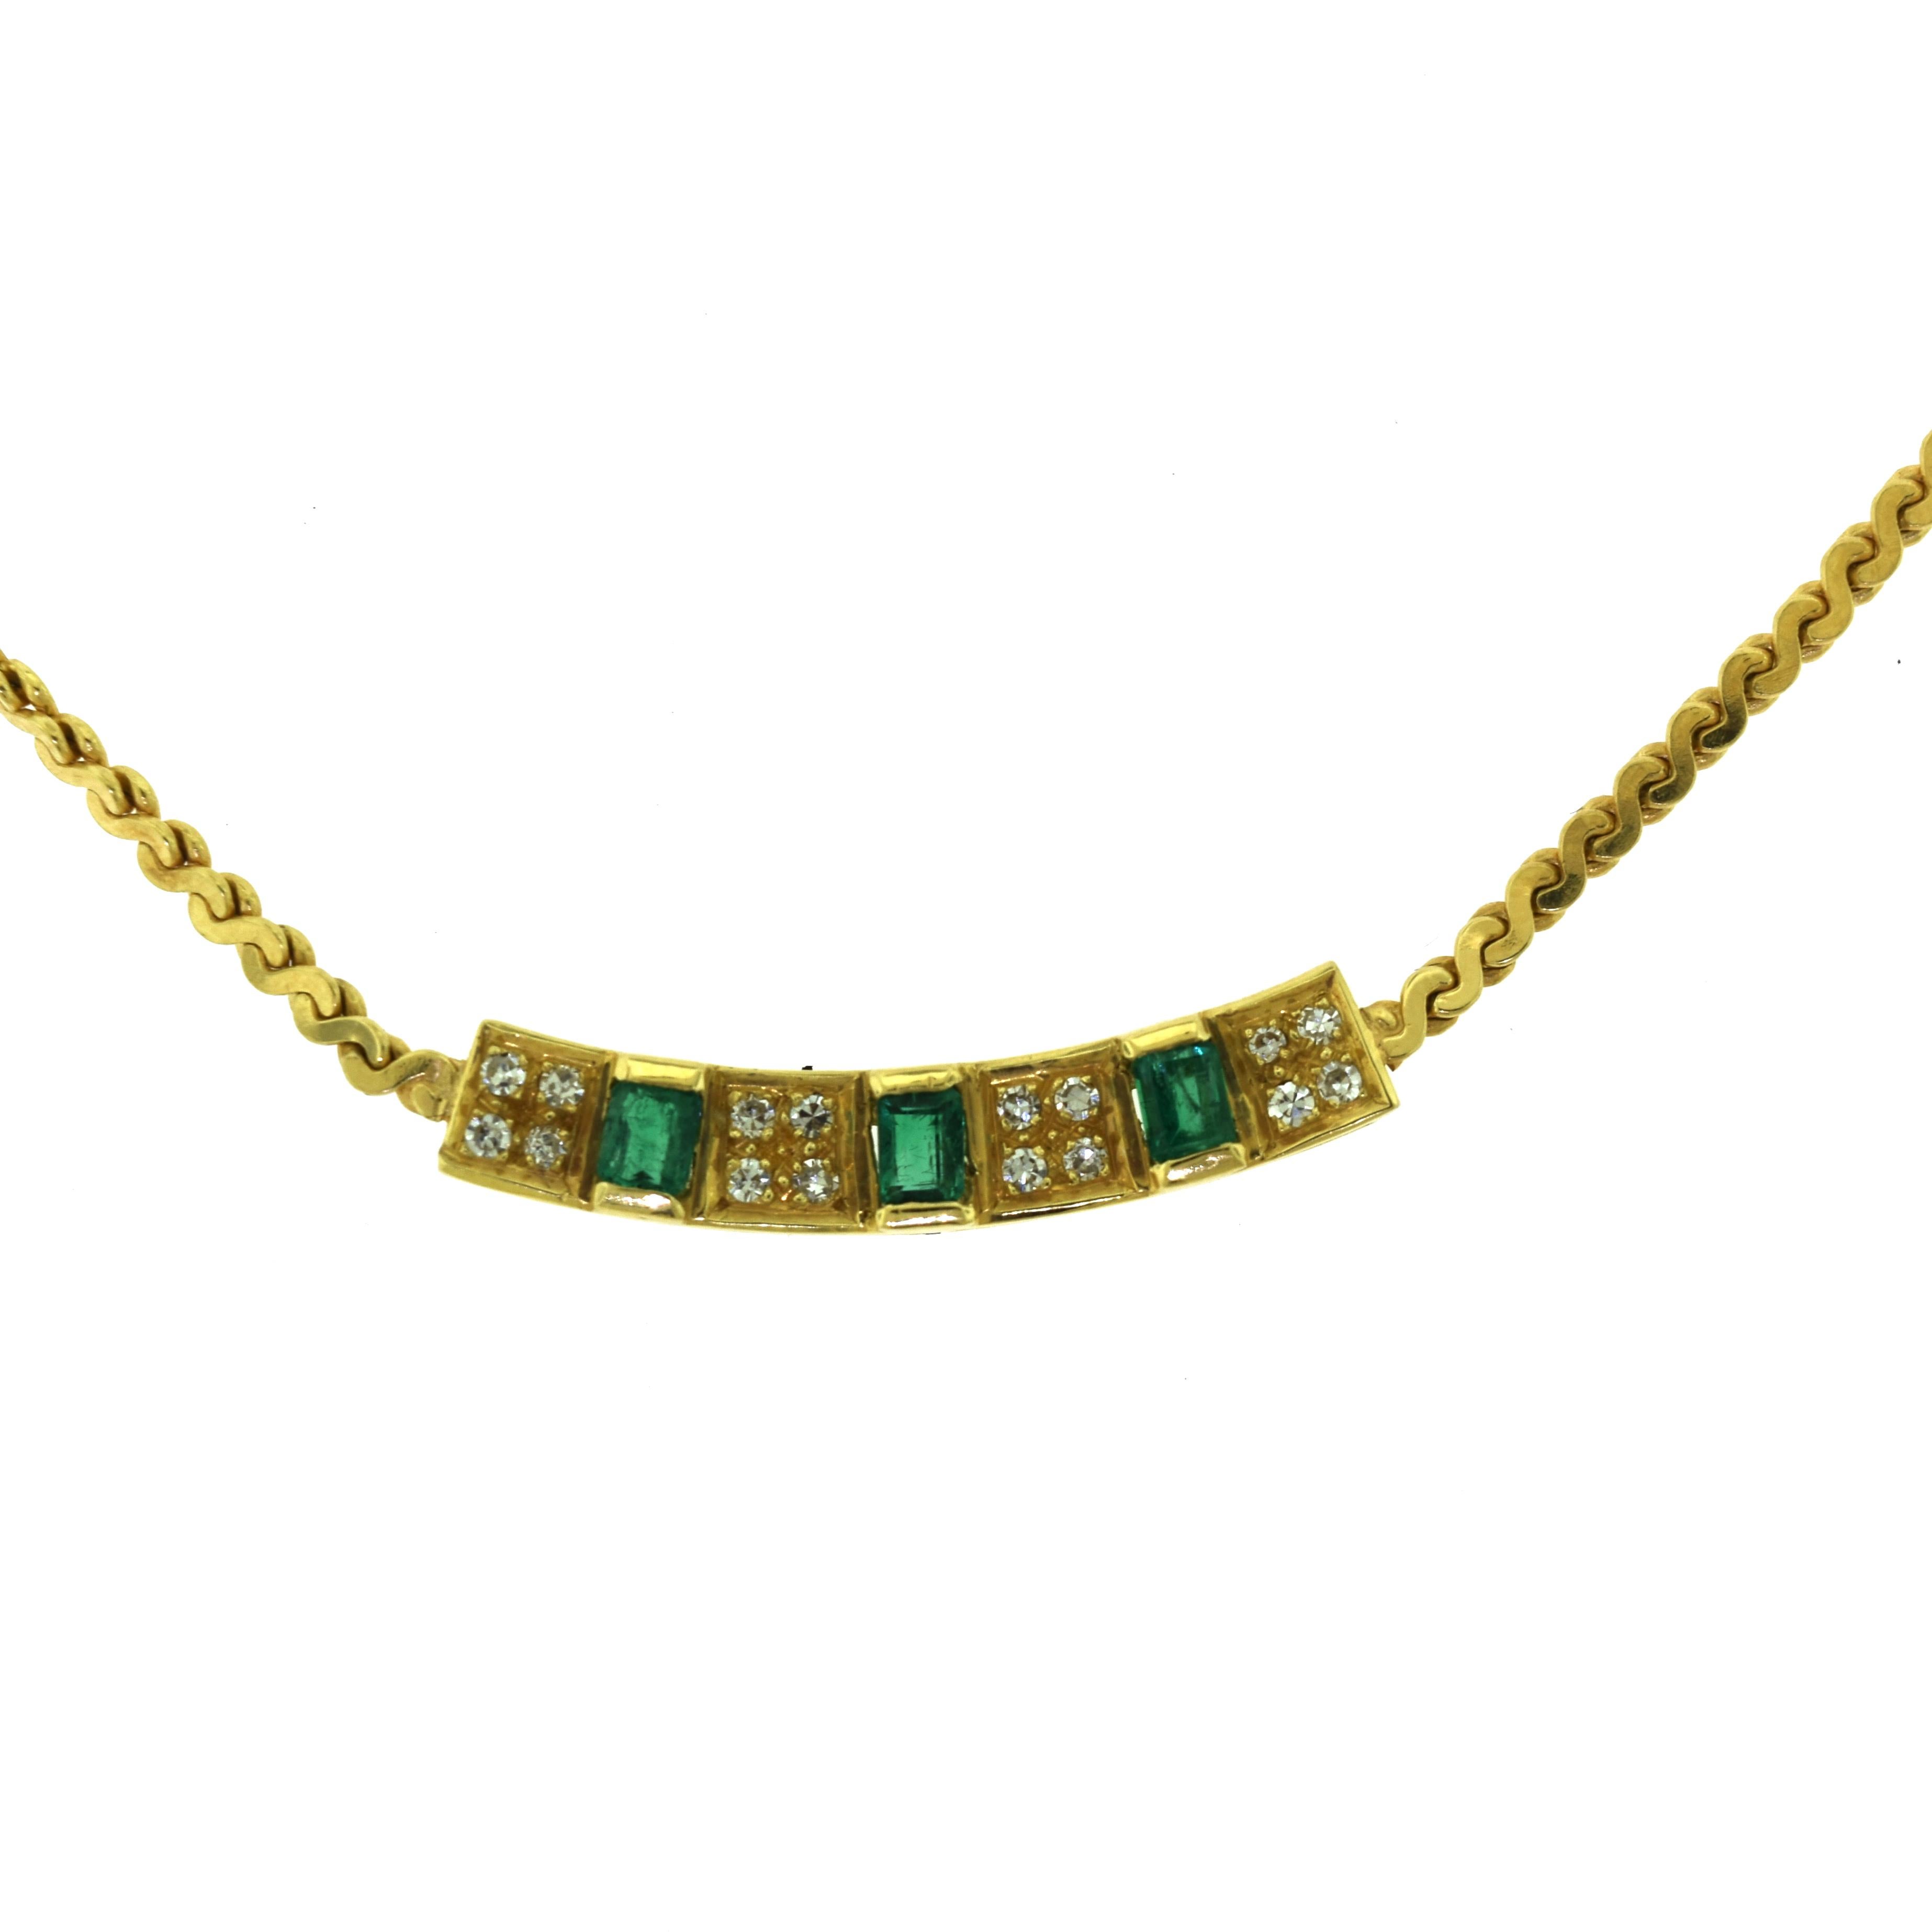 Brilliance Jewels, Miami
Questions? Call Us Anytime!
786,482,8100

Style: Multi Gem Stone Bar Necklace

Metal: Yellow Gold

Metal Purity: 18k 

Stones: 16 Round Diamonds = (approx. 1 ct)

                   3 Baguette Cut Emeralds = (approx. 0.42